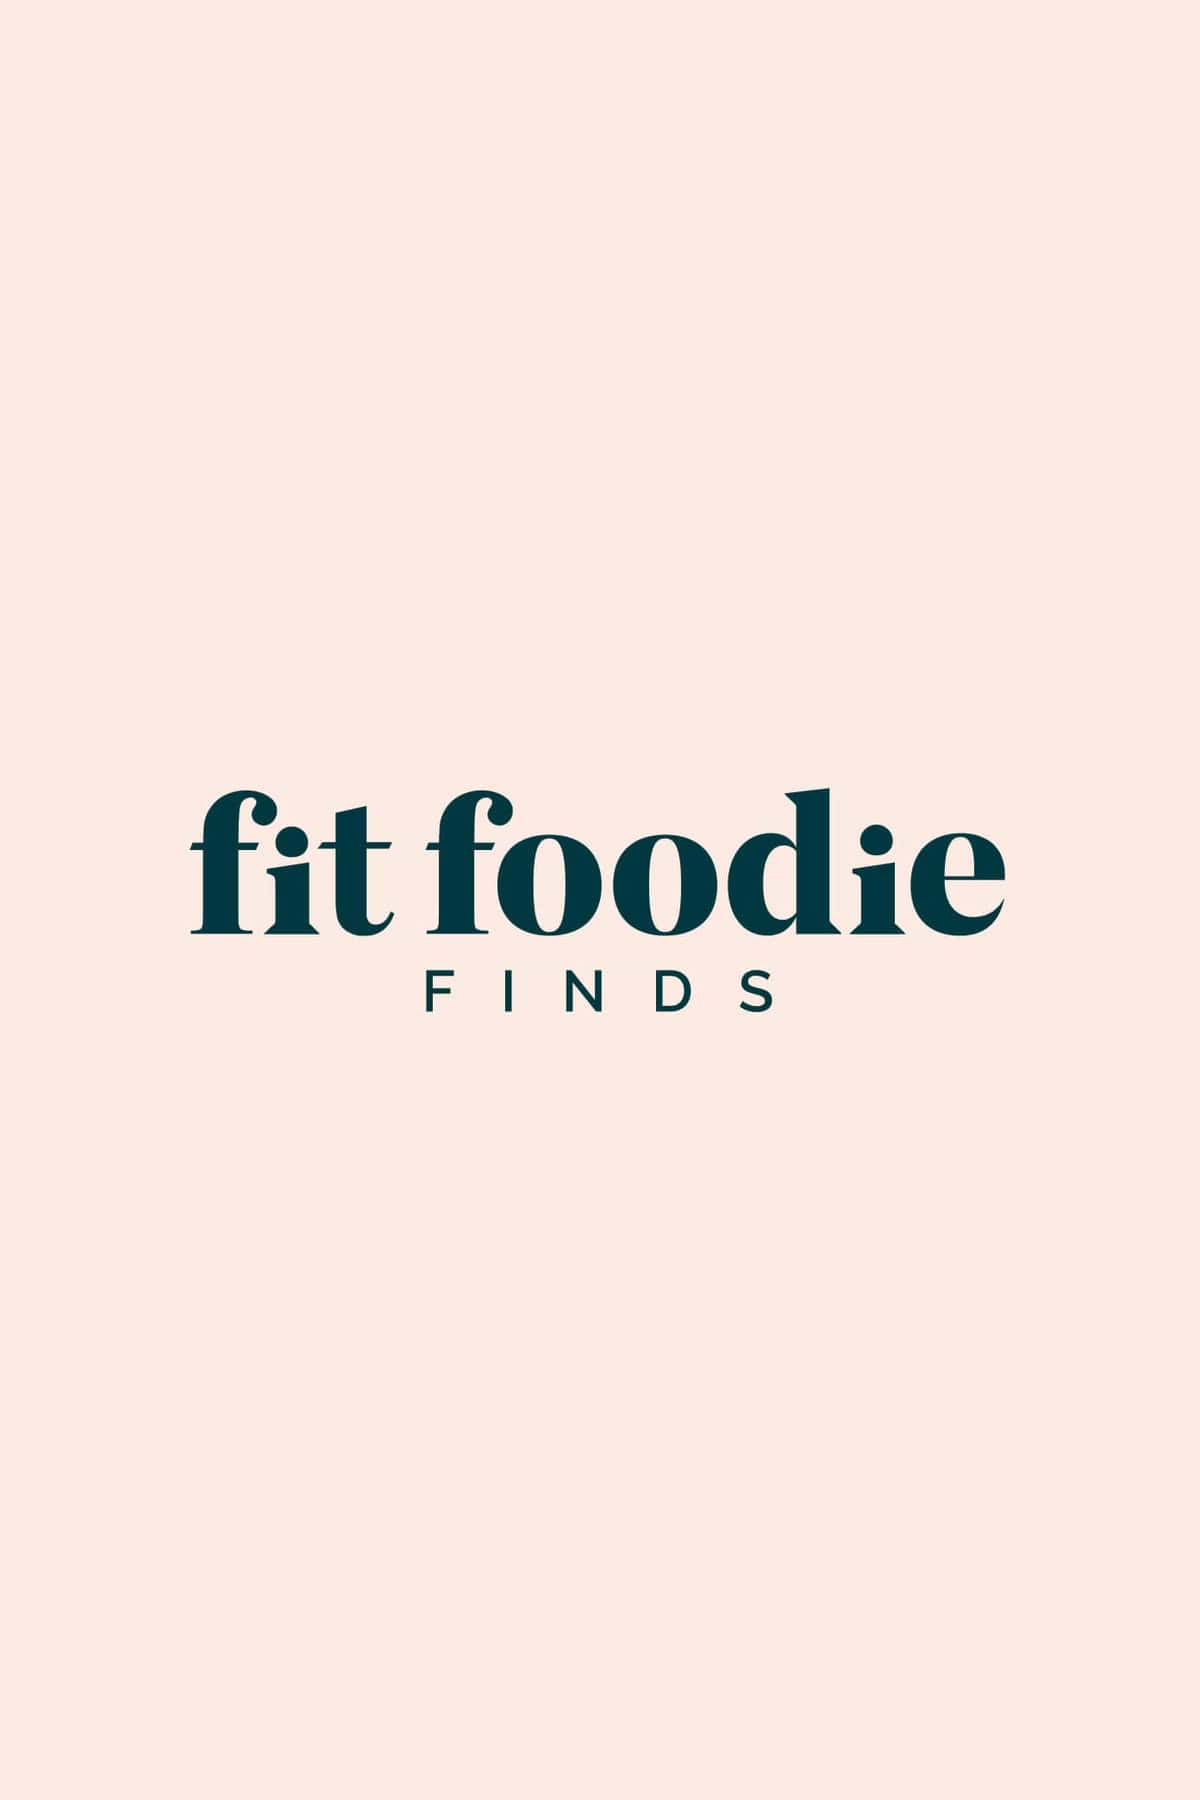 A light pink background features the text "fit foodie FINDS" in dark green capital and lowercase letters.